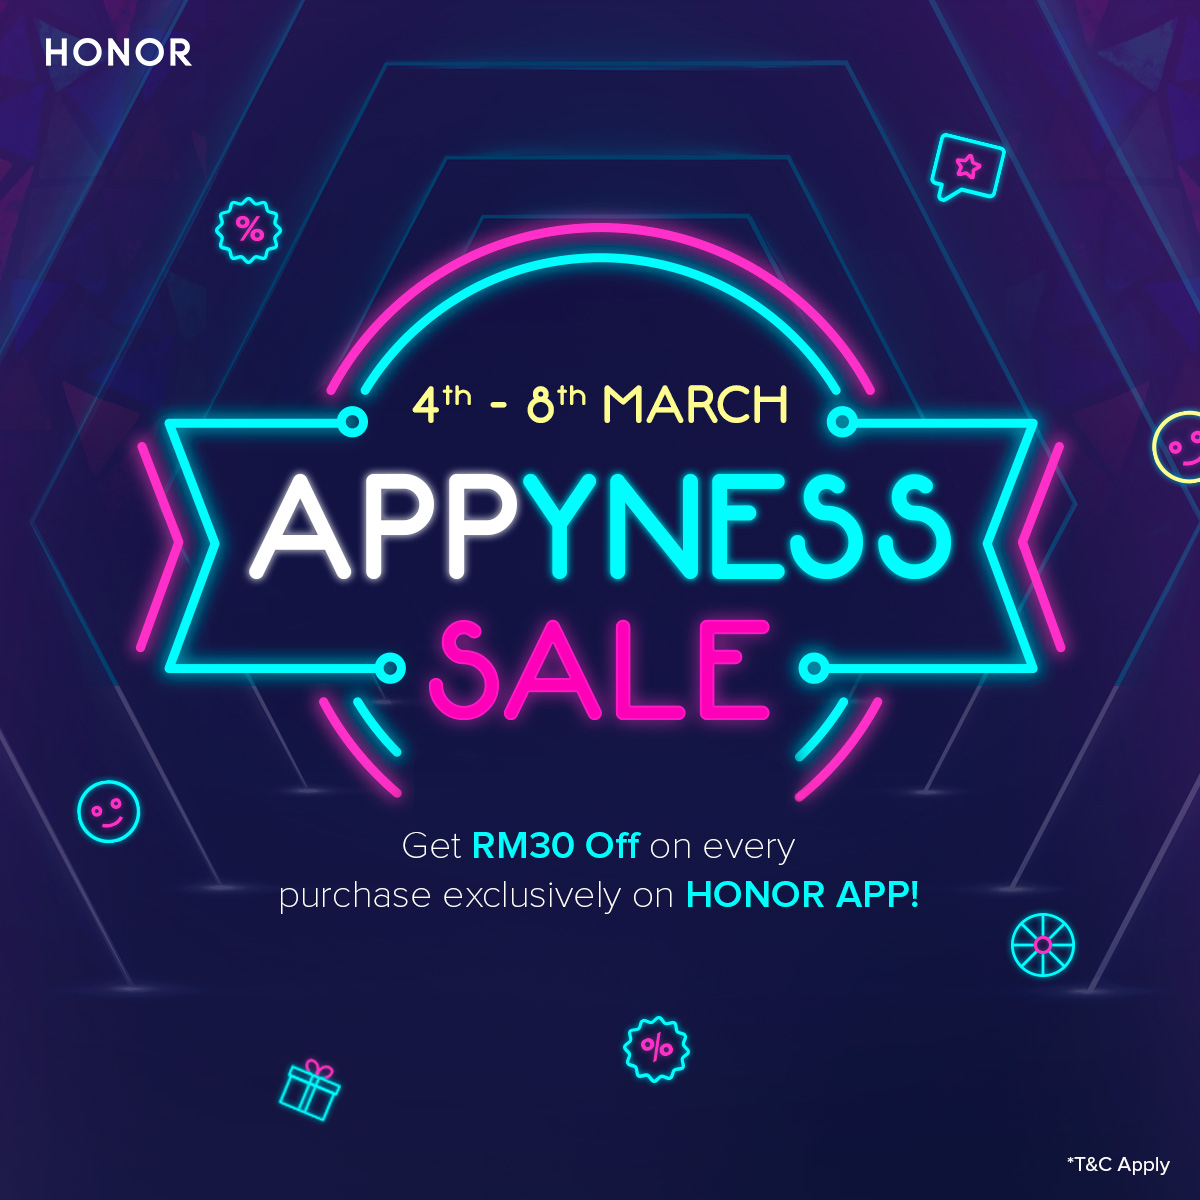 HONOR Appyness